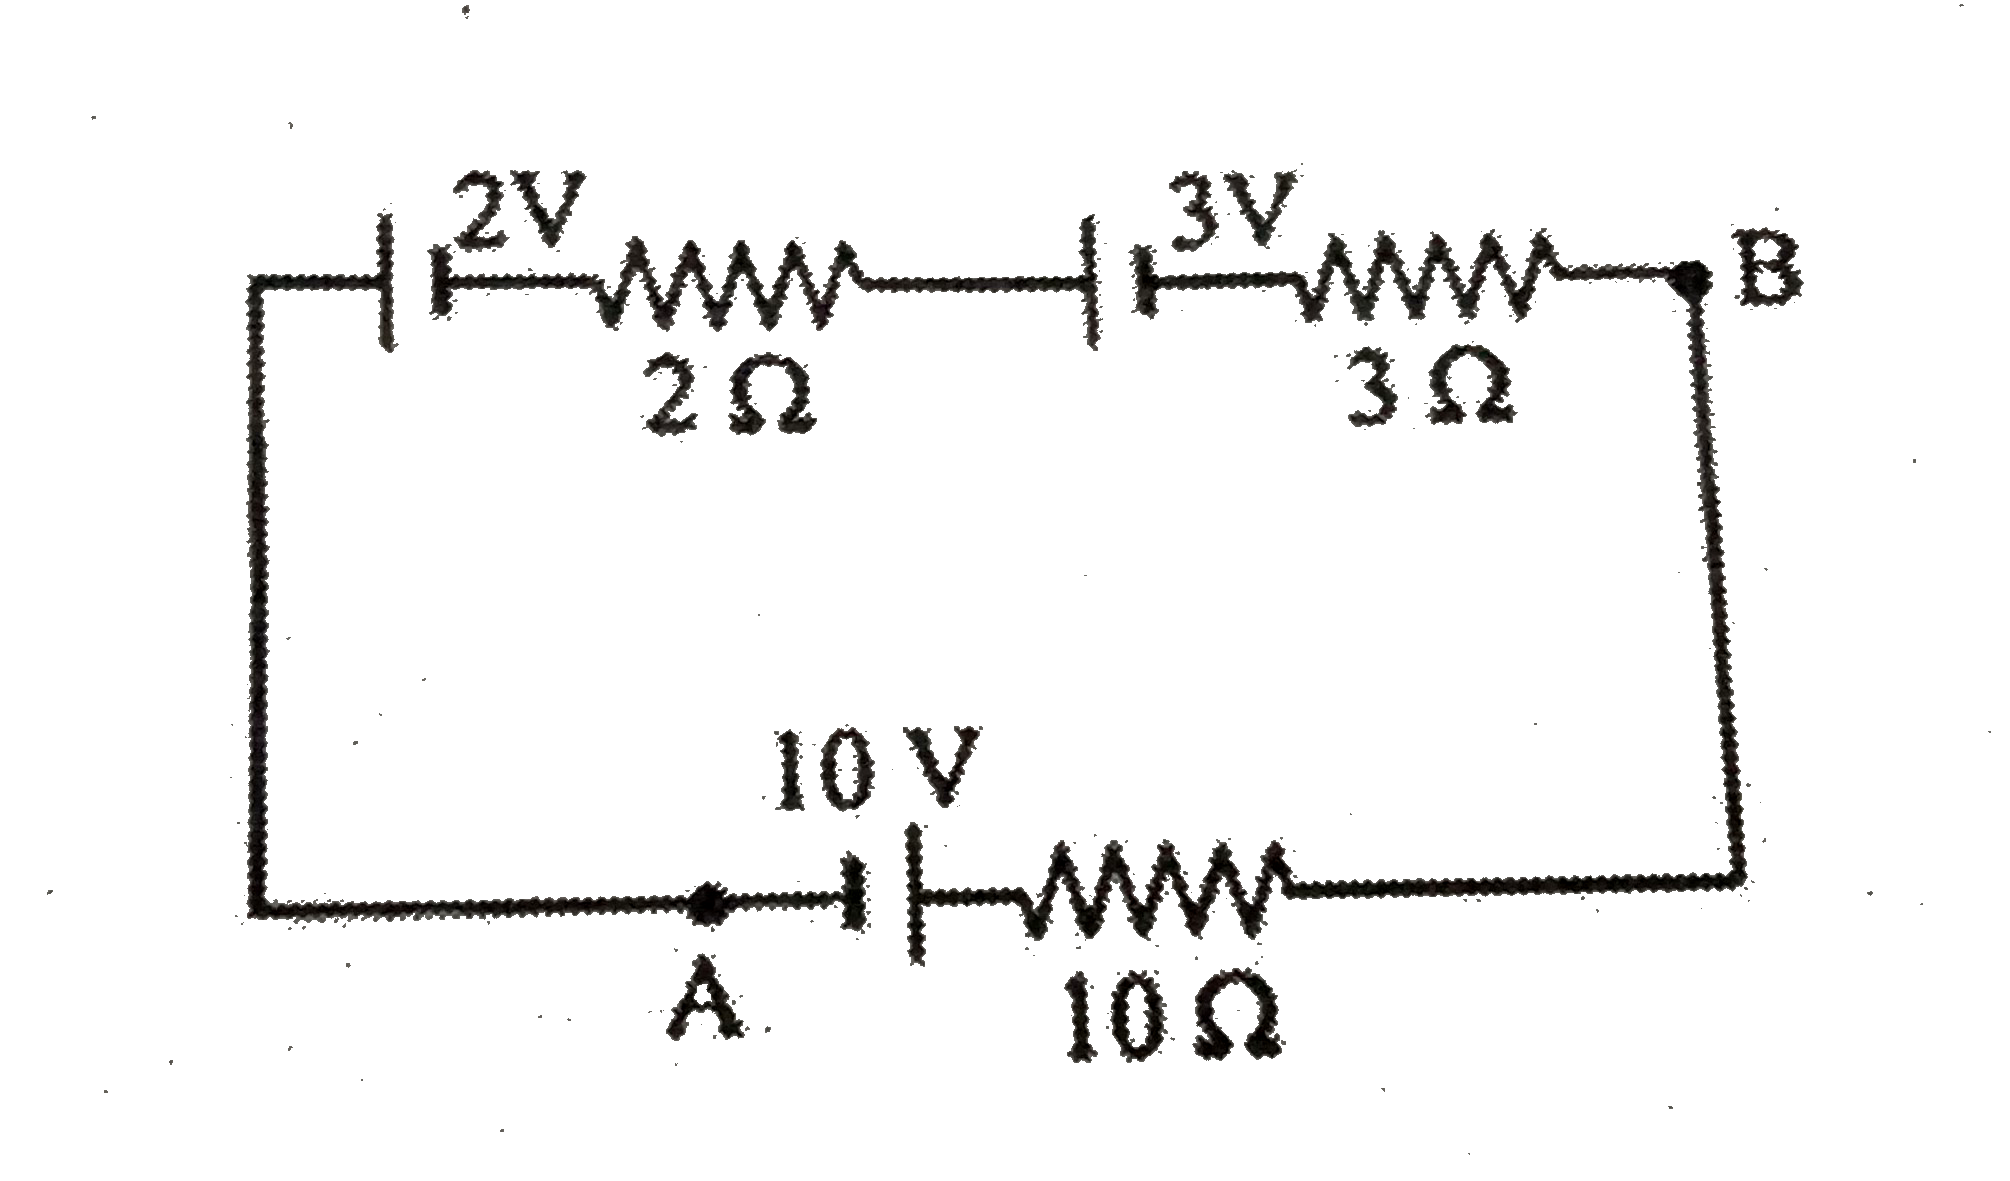 The potential difference between A and B in  the circuit shown is -